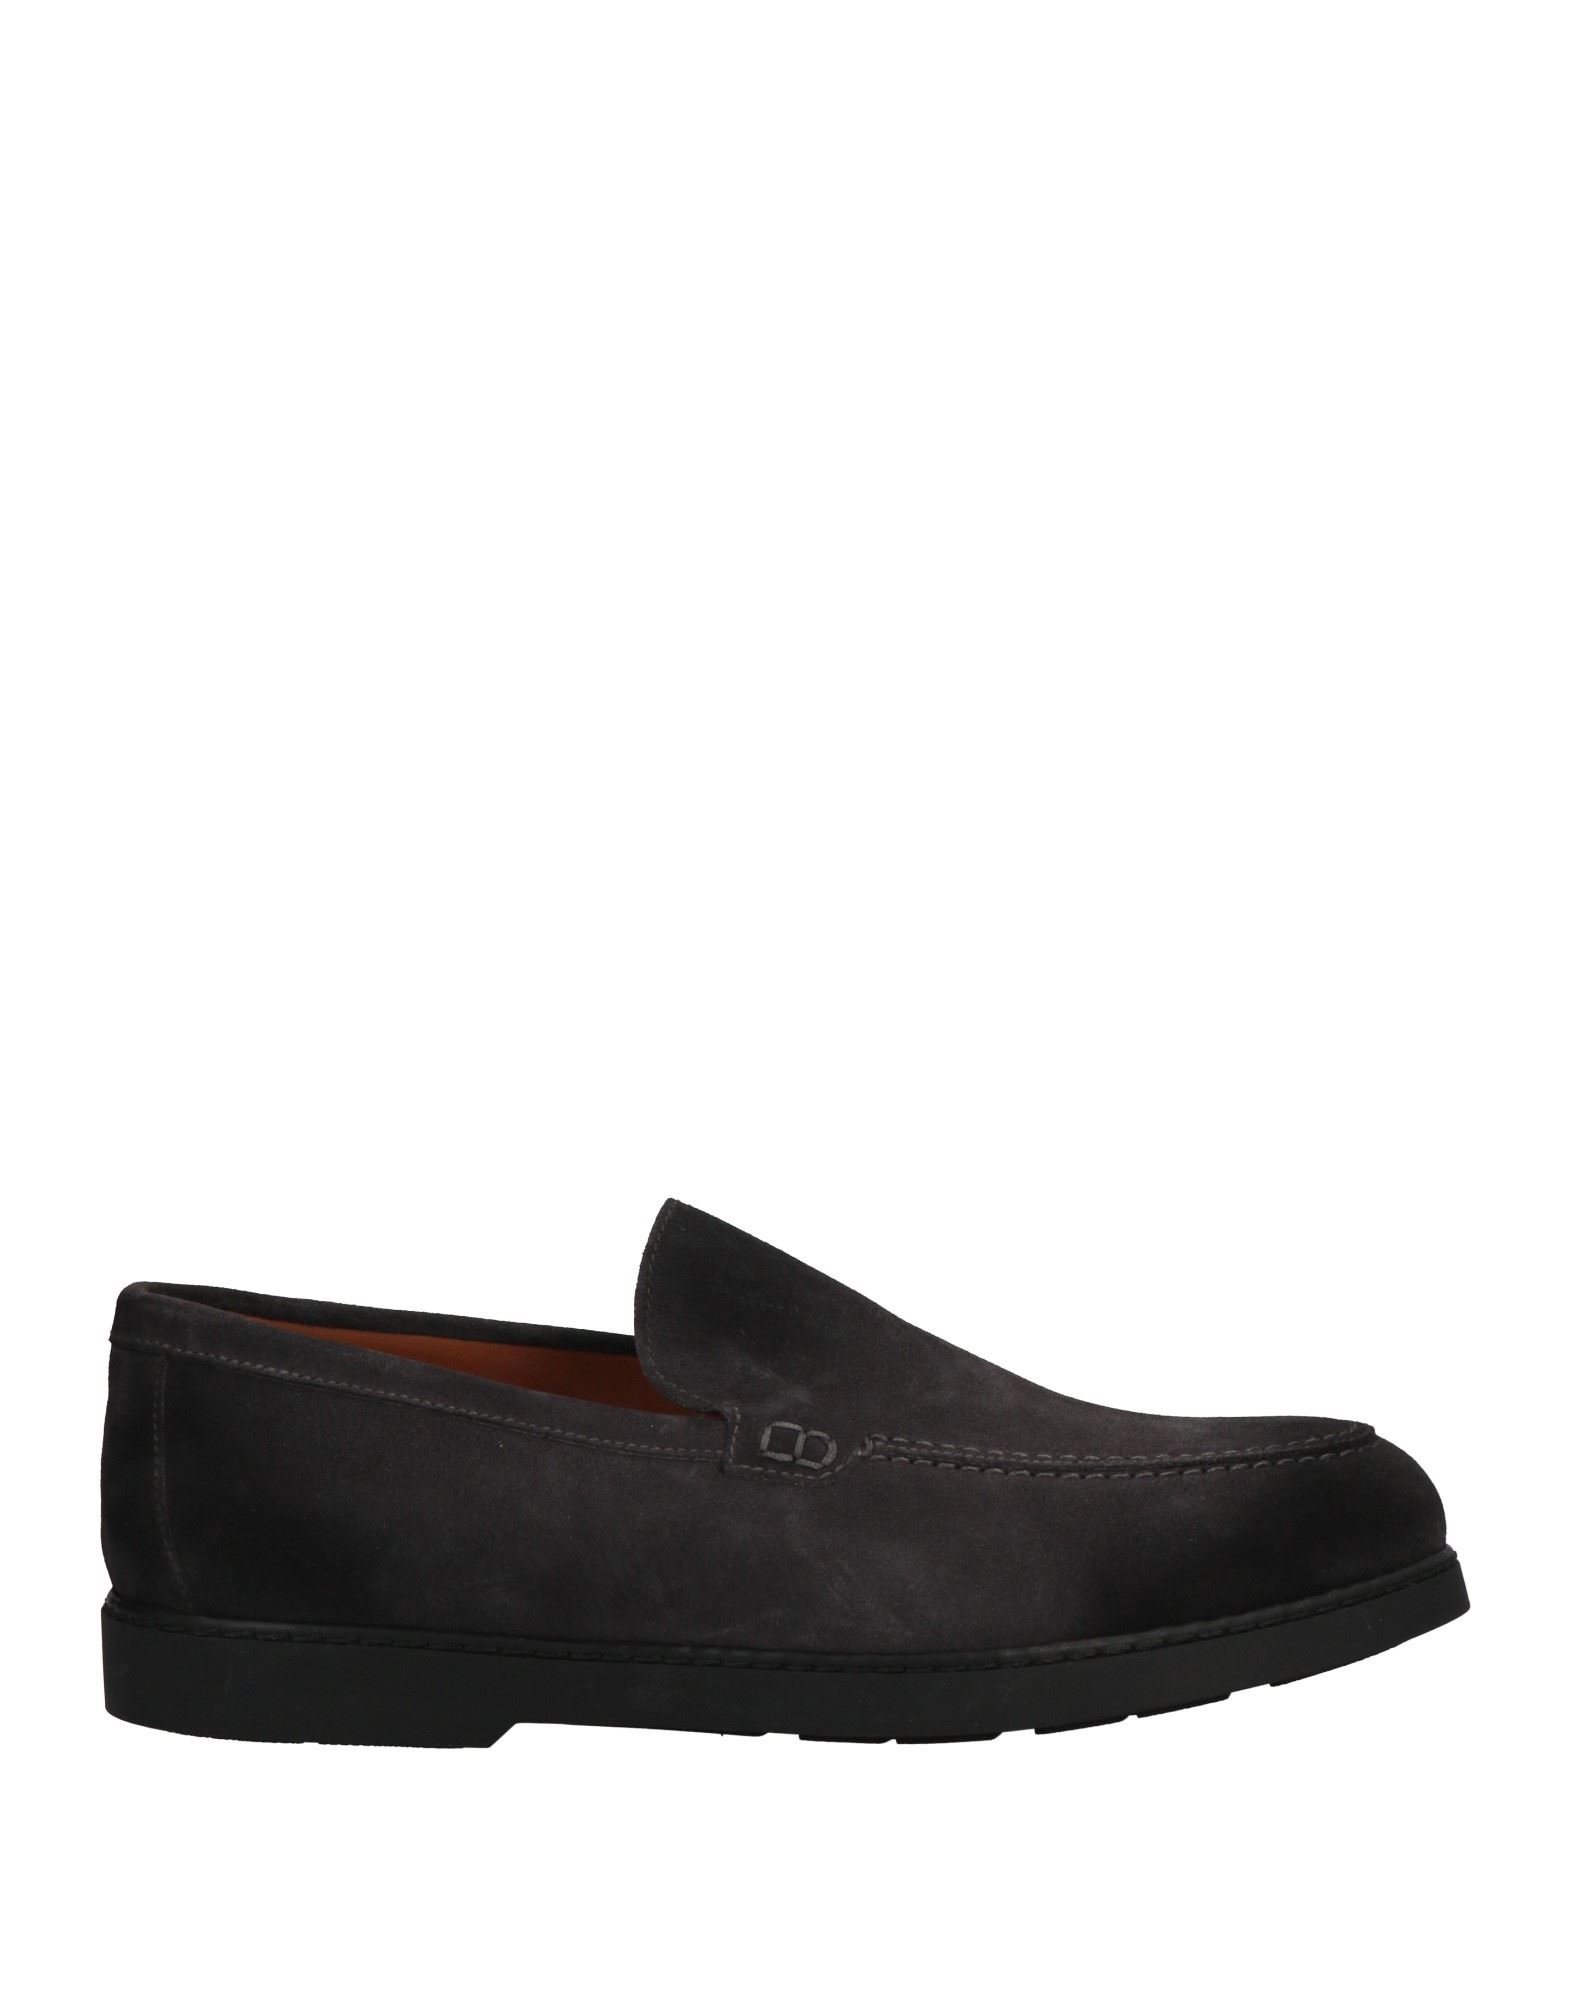 Doucal's Loafers In Steel Grey